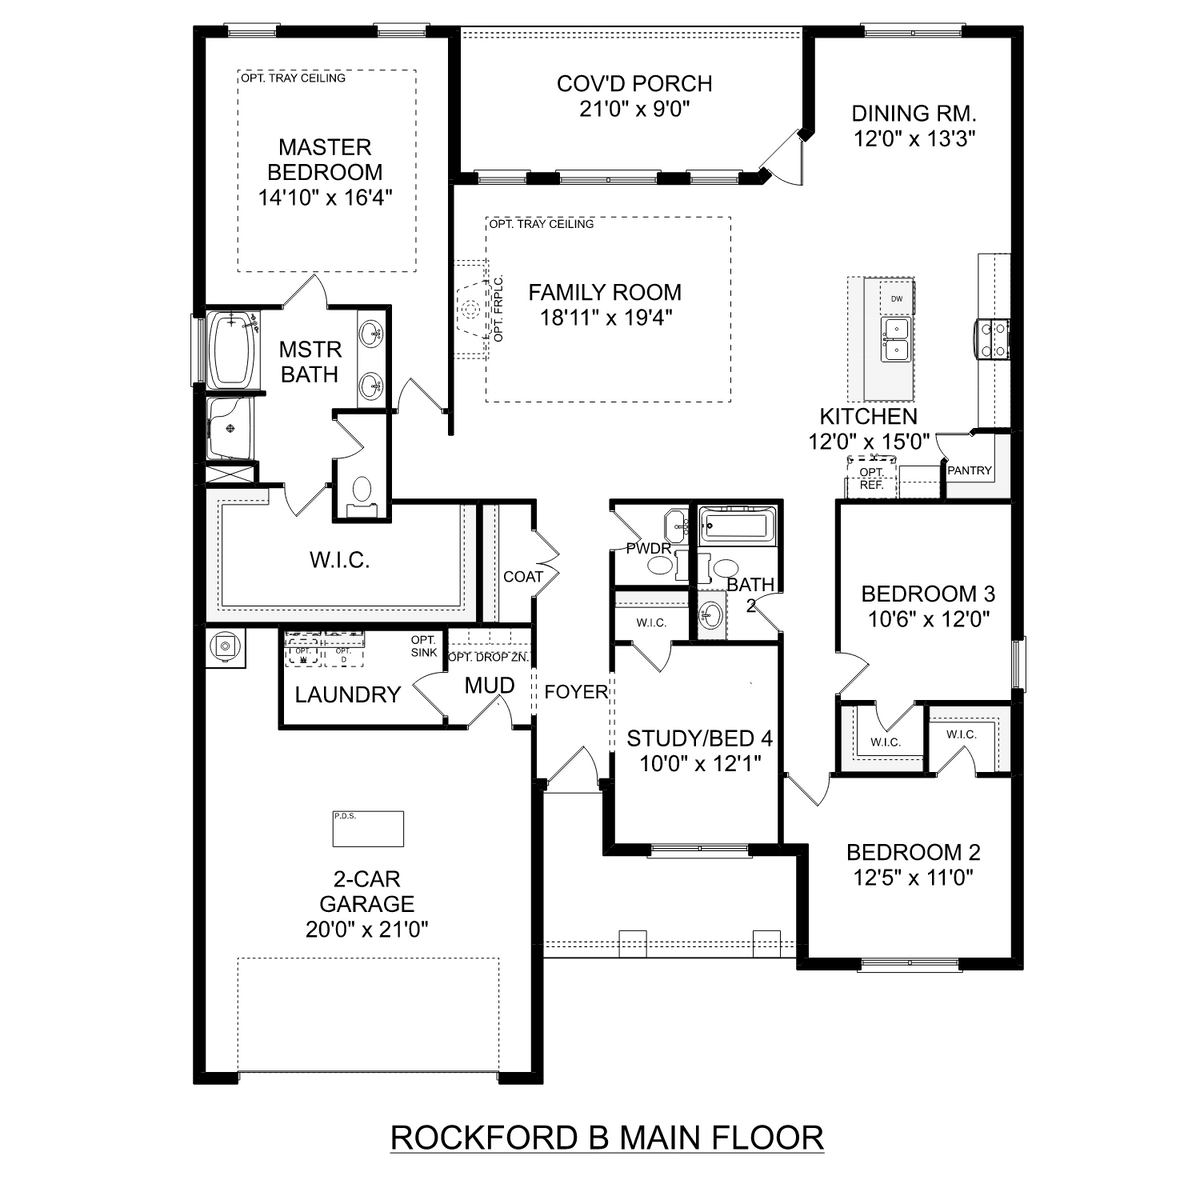 1 - The Rockford B buildable floor plan layout in Davidson Homes' Kendall Downs community.